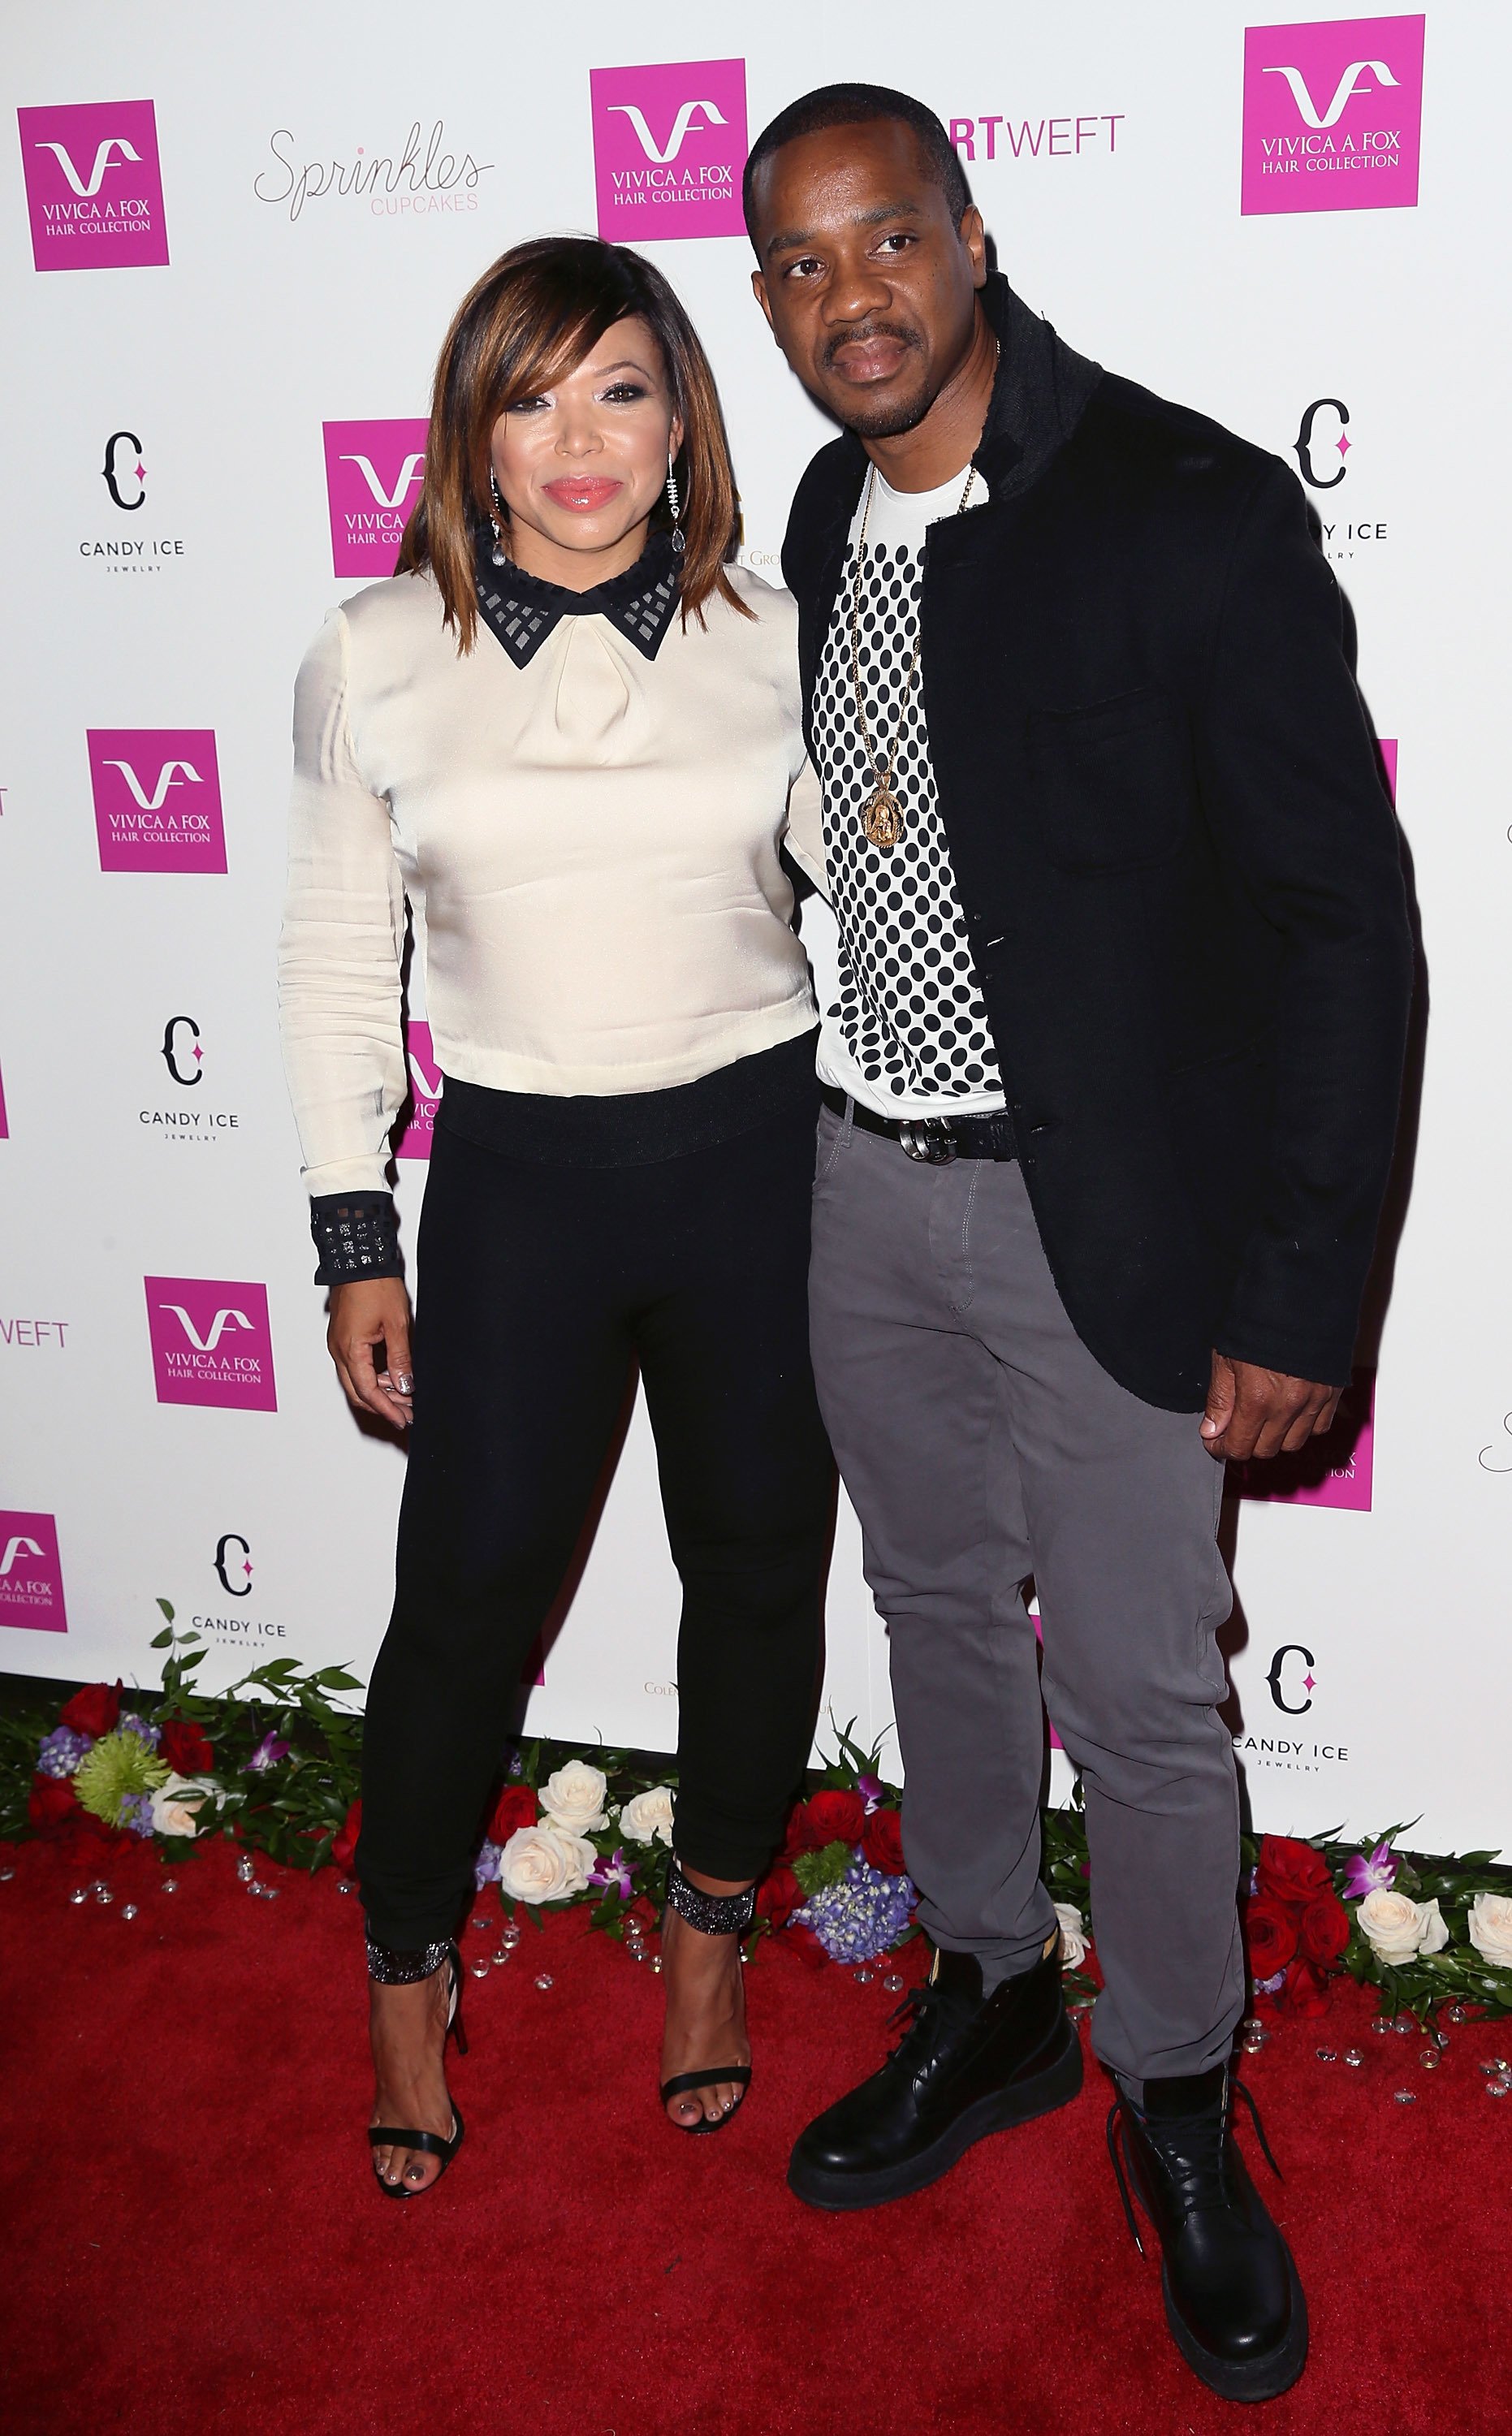 Actress Tisha Campbell-Martin and husband actor Duane Martin attend the Vivica A. Fox 50th birthday celebration at Philippe Chow on August 2, 2014 | Photo: Getty Images